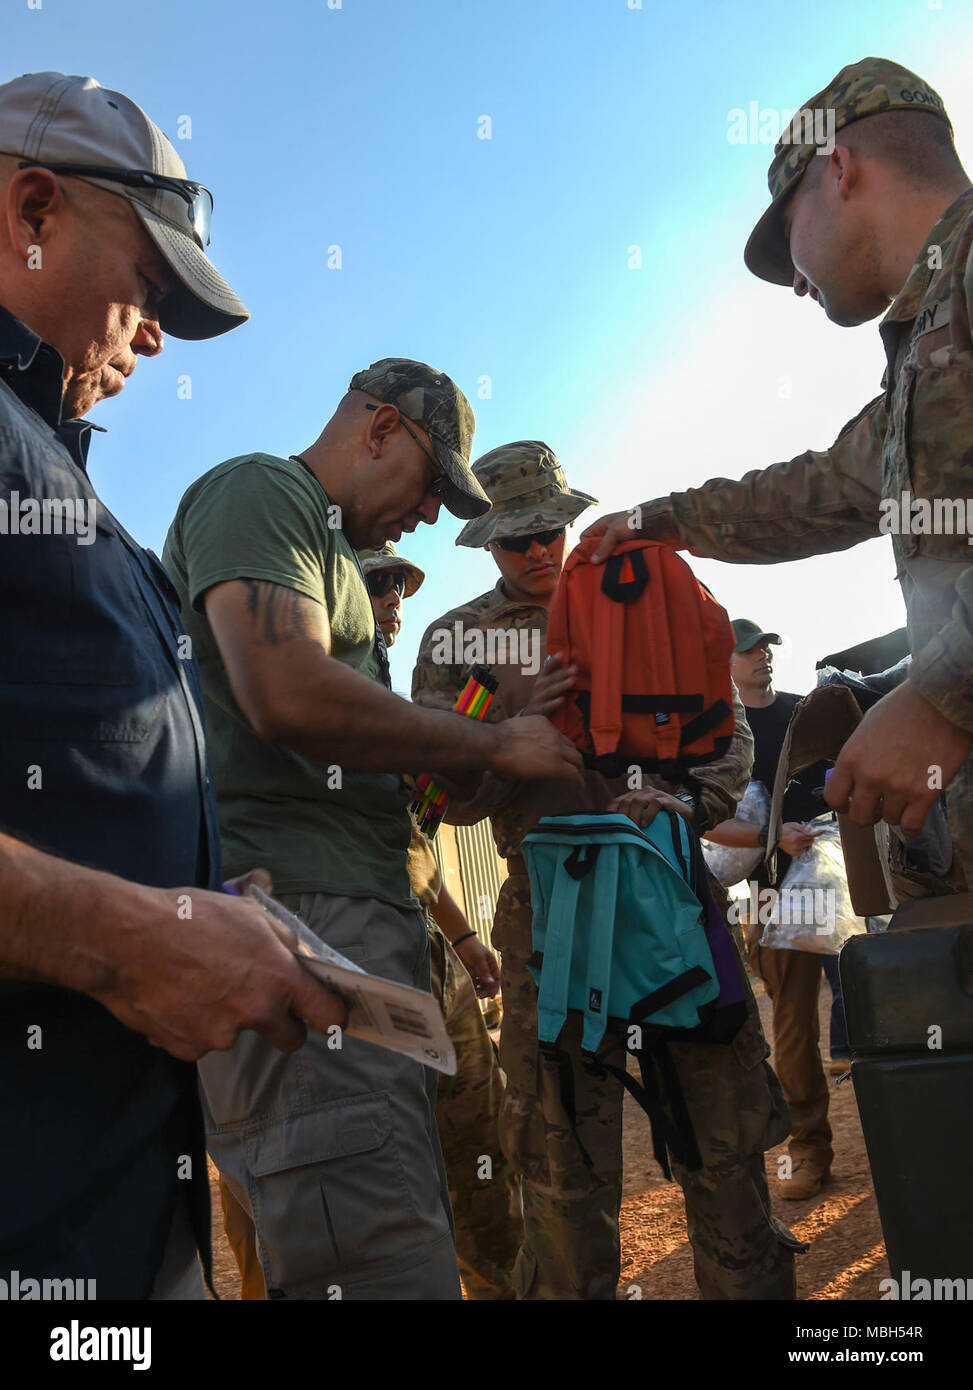 U.S. Army Soldiers with Animal Company, 3rd Battalion, 141st Infantry Regiment, assigned to Combined Joint Task Force - Horn of Africa (CJTF-HOA) put school supplies into backpacks to be given to Somali children in Ali Oune, Djibouti, March 28, 2018. CJTF-HOA service members donated more than $400 of school supplies and sandals to Somali refugees in Djibouti. Stock Photo